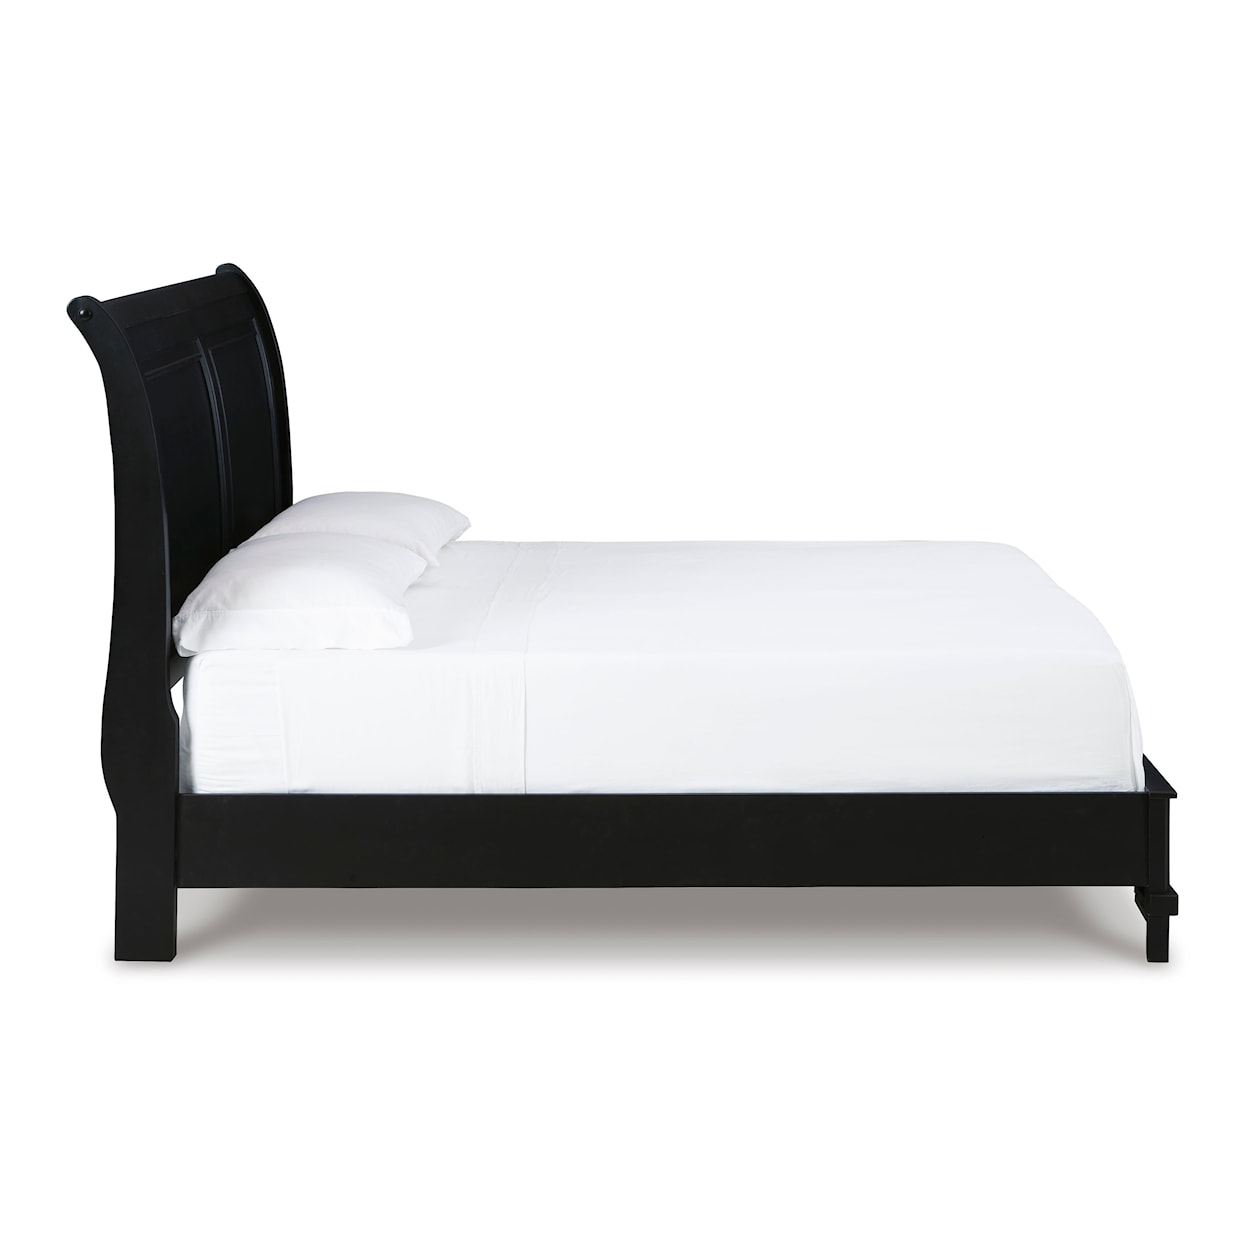 Signature Chylanta Queen Sleigh Bed